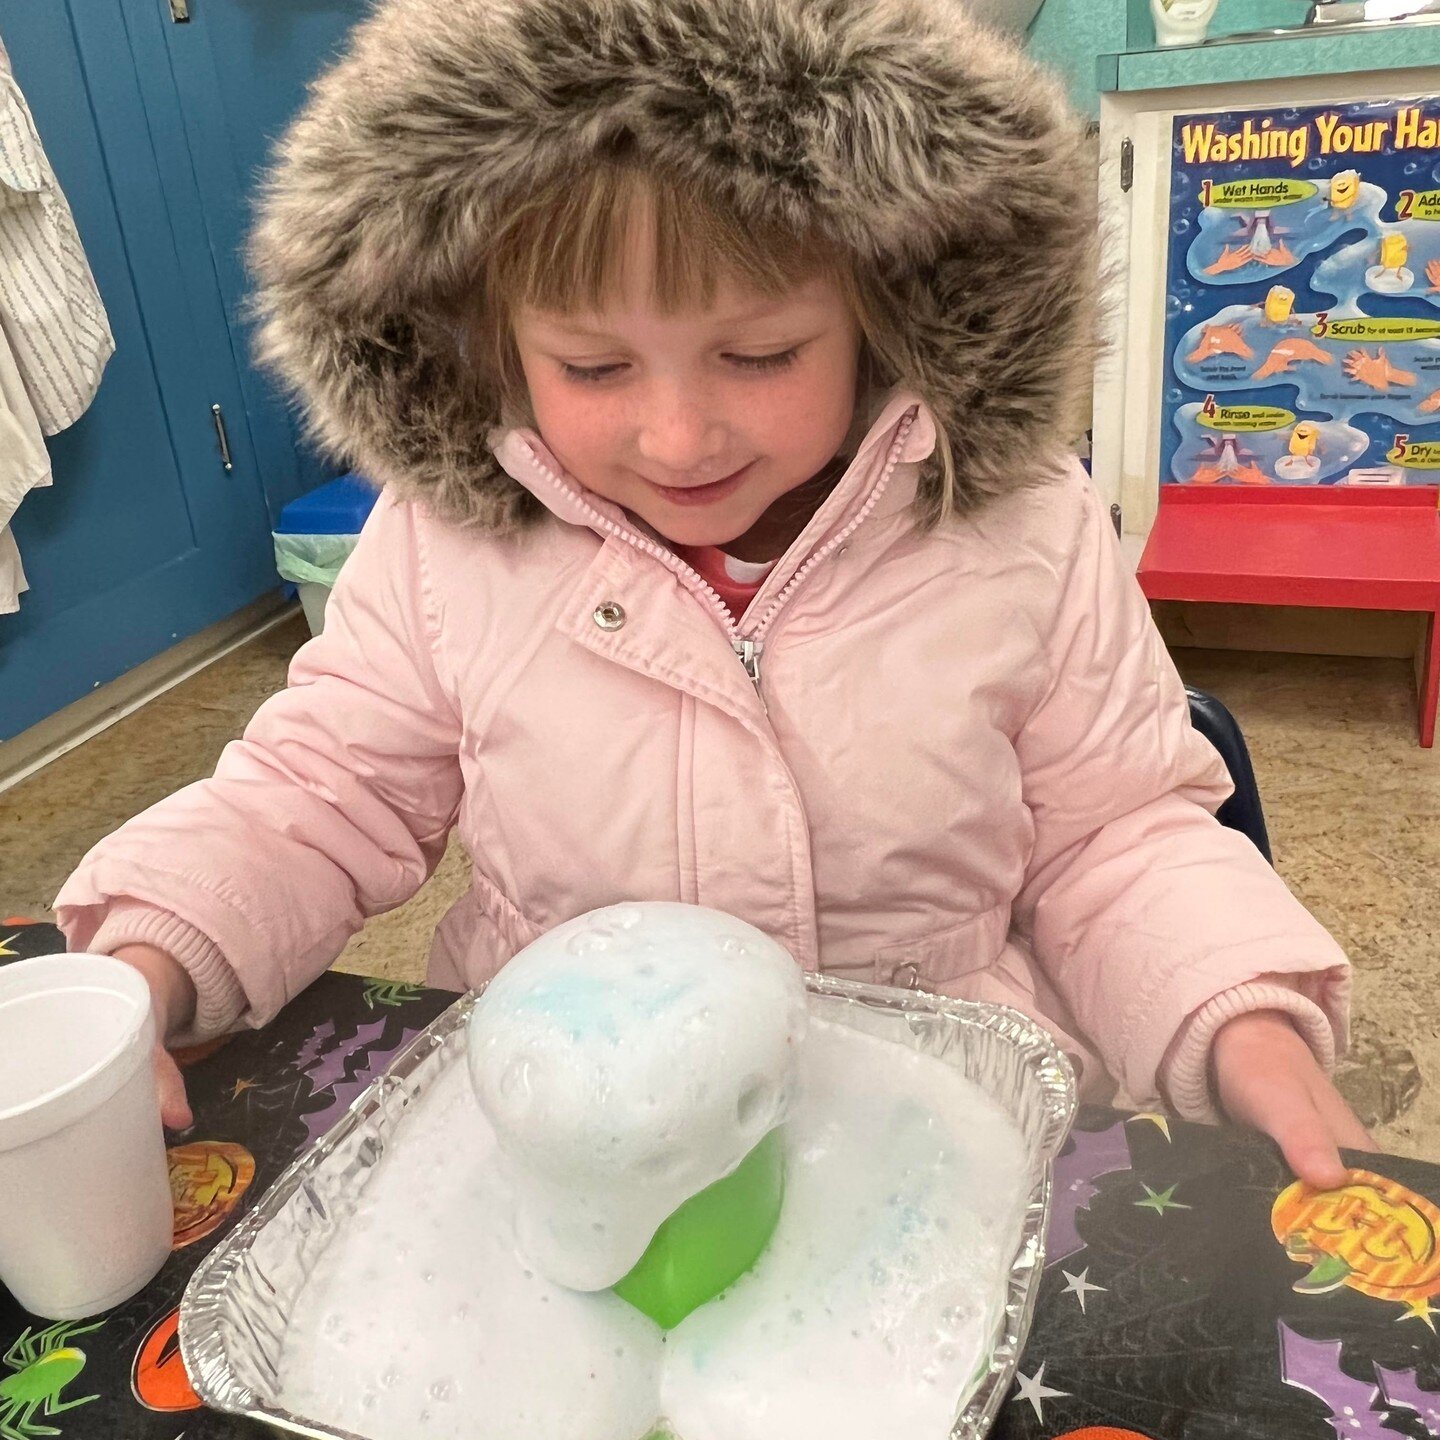 A few more fun experiments before Hallowe'en!

Make sure your kids get their spot, the Tuesday/Thursday class still has openings.

Registration for 2022/23 open now!
- Small class sizes.
- Located right in Briar Hill School
- Across the hall from acc